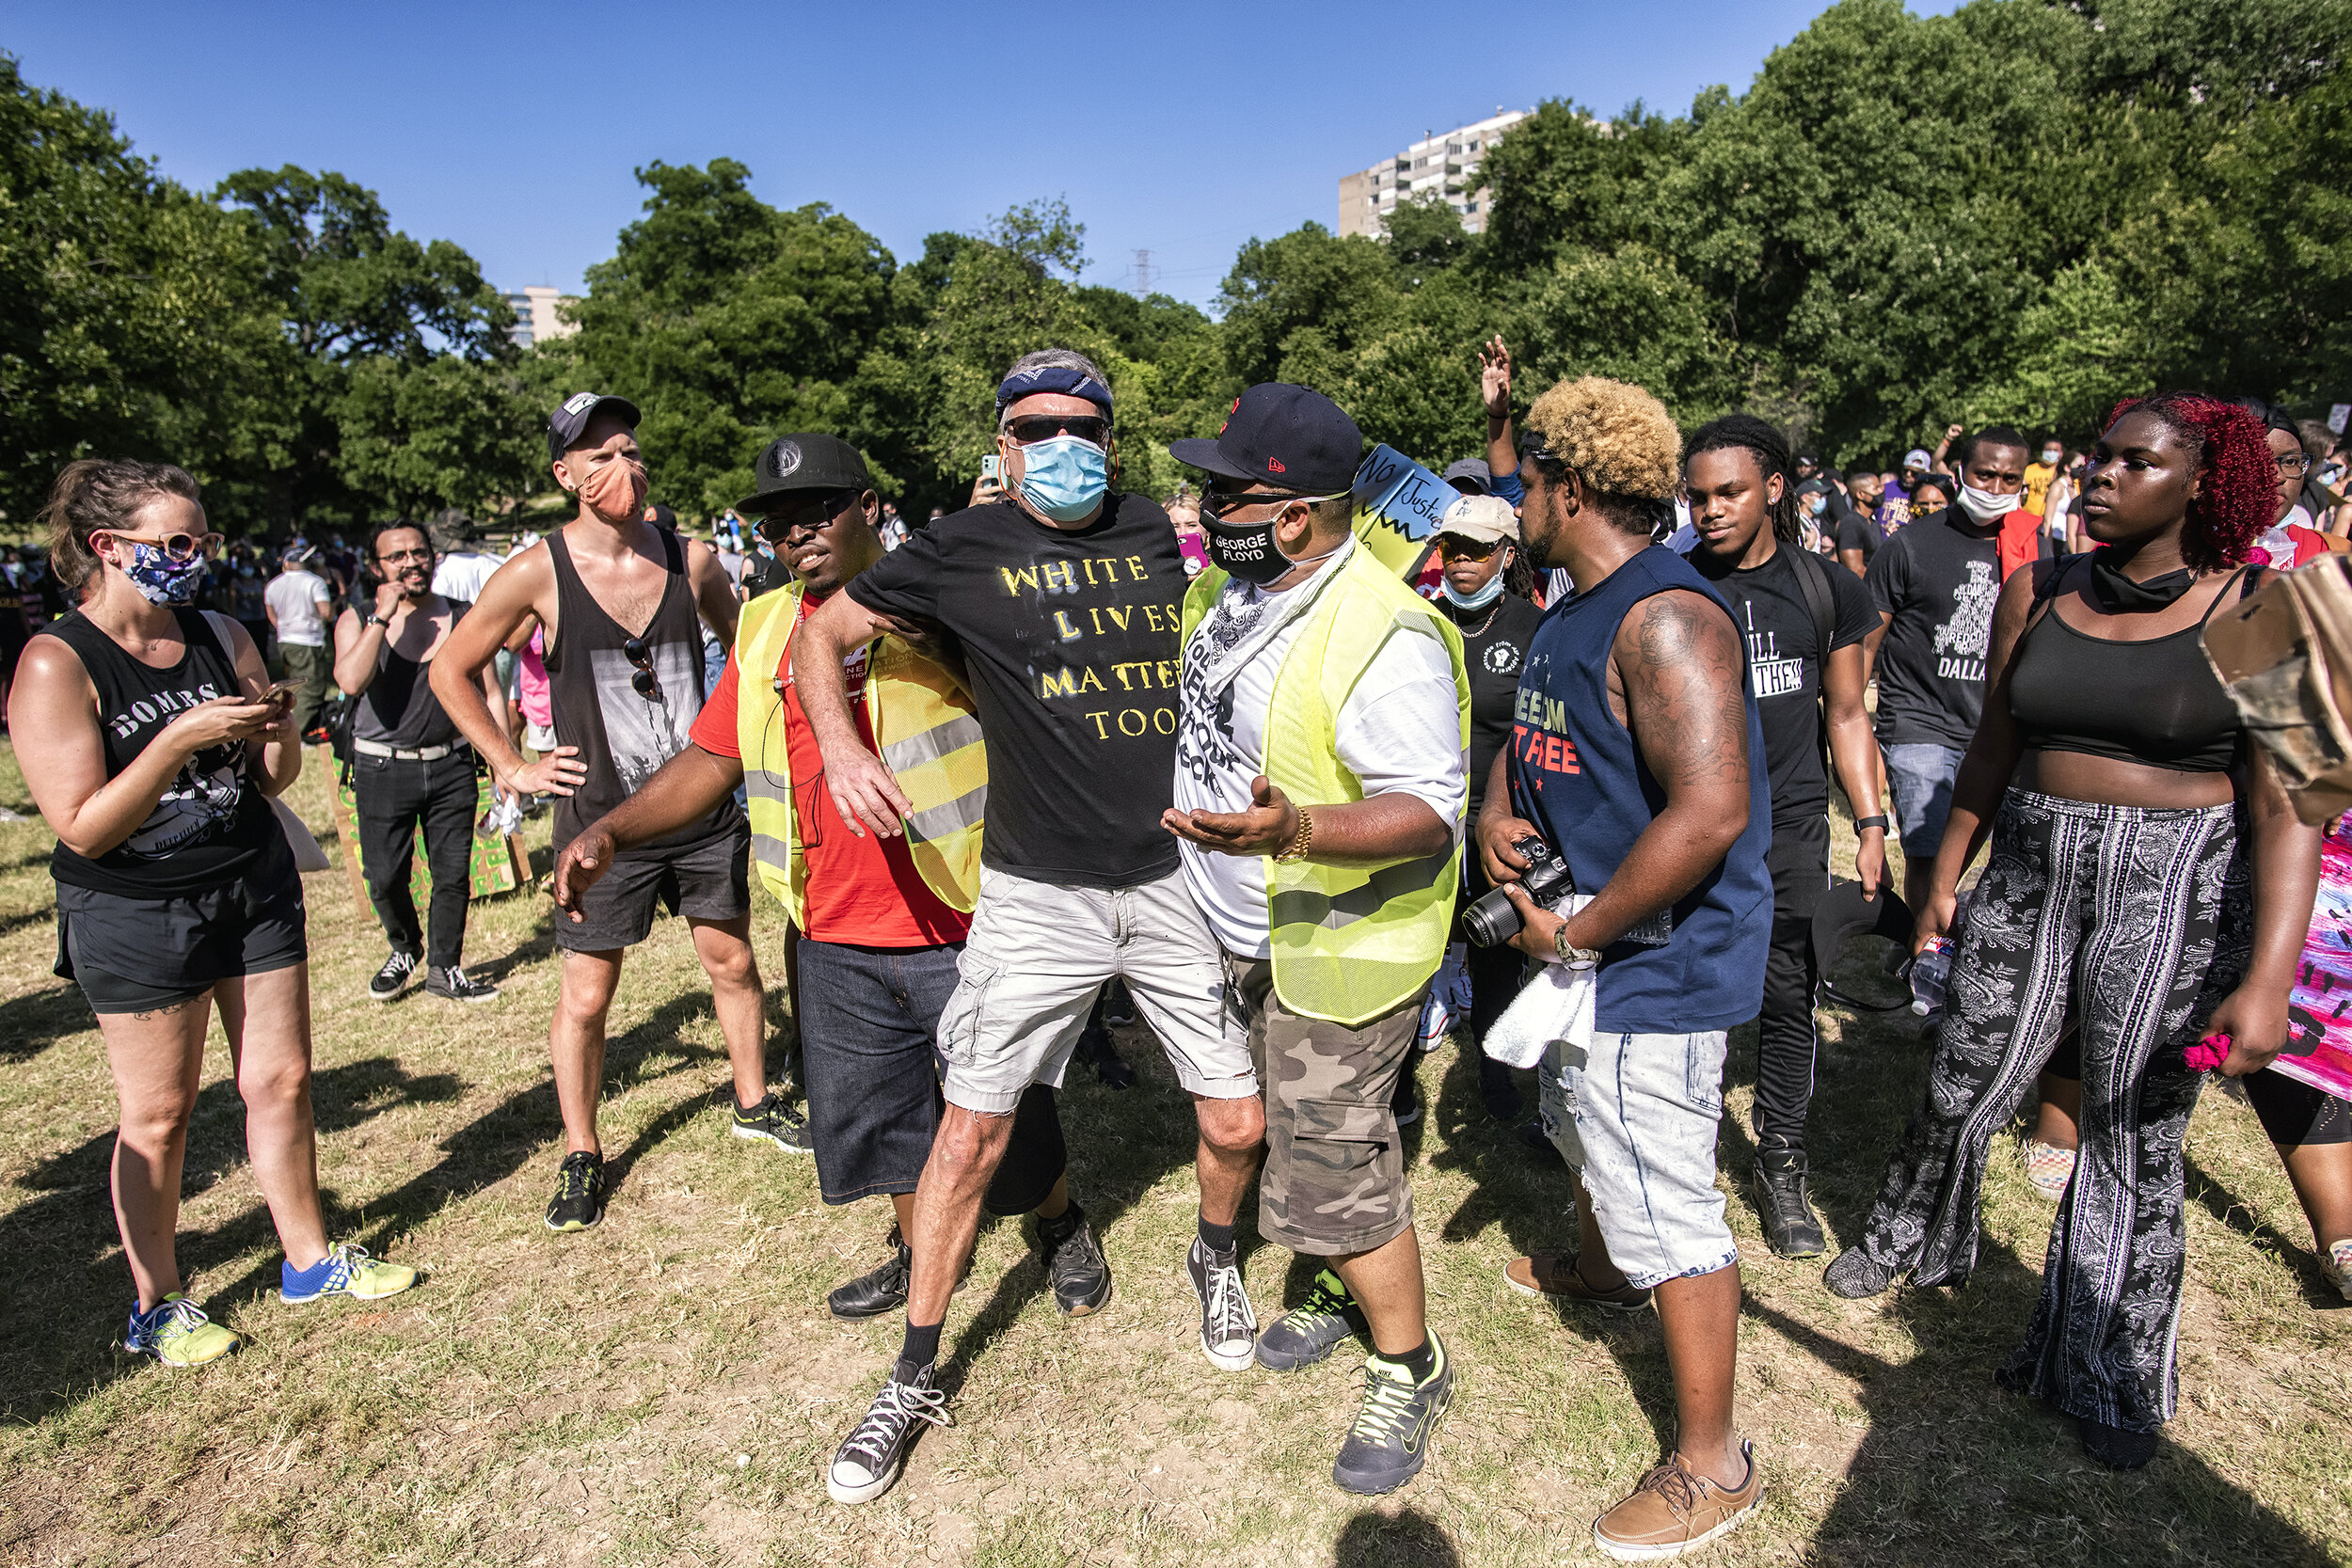  A man wearing a T-shirt reading “white lives matter too” is ejected from the Black State of Emergency protest at Reverchon Park in Dallas, TX on June 13, 2020.  The slogan was seen by many as an affront to the Black Lives Matter movement. 